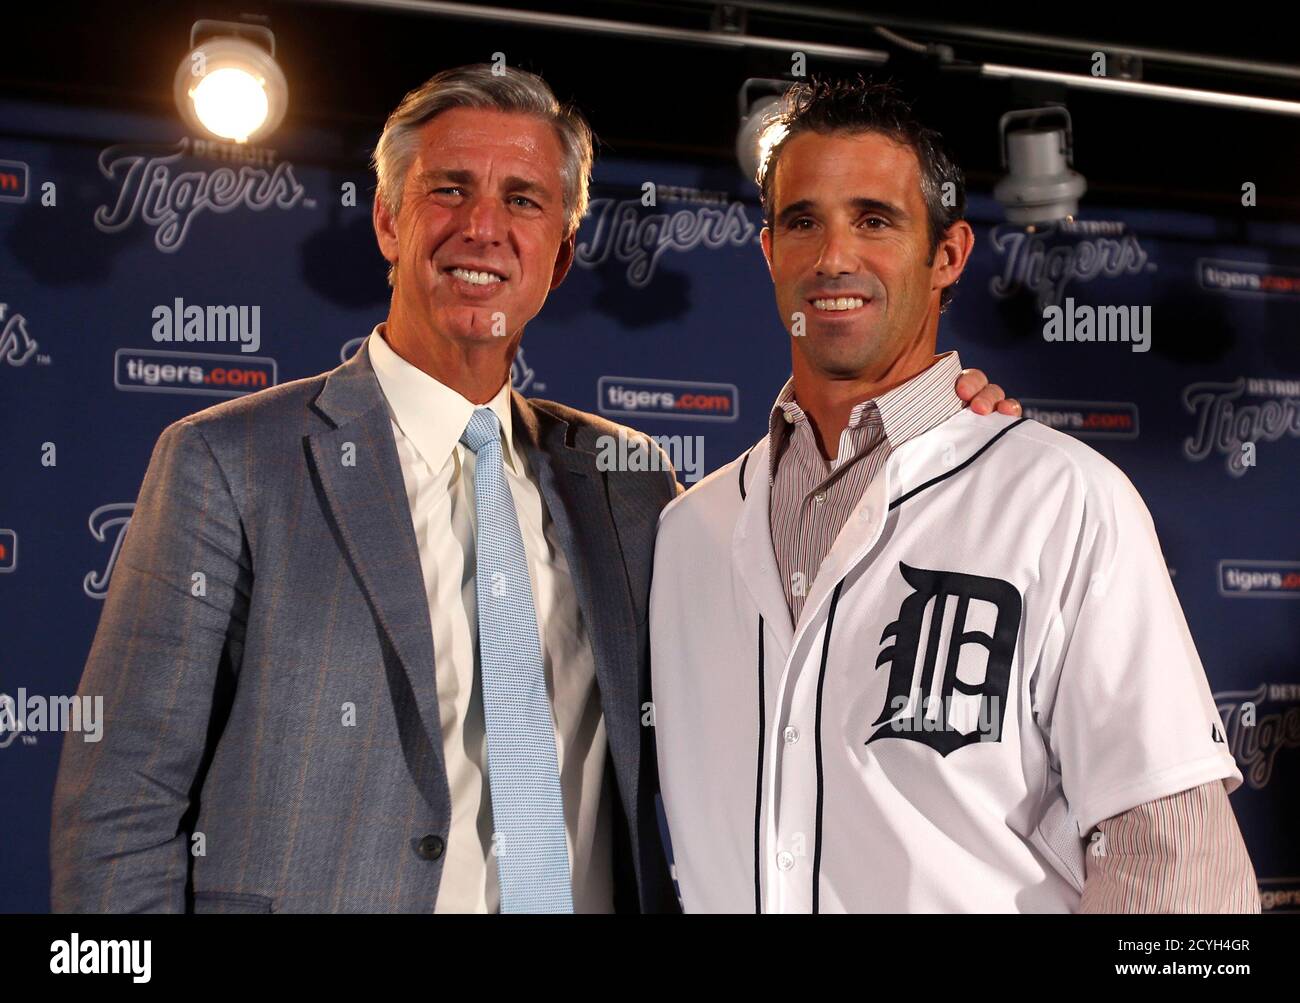 Detroit Tigers General Manager Dave Dombrowski (L ) and newly named Tigers manager Brad Ausmus pose together during a press conference where Ausmus was named the 37th manager in franchise history of the Tigers in Detroit, Michigan November 3, 2013.   REUTERS/Rebecca Cook  (UNITED STATES - Tags: SPORT BASEBALL) Stock Photo